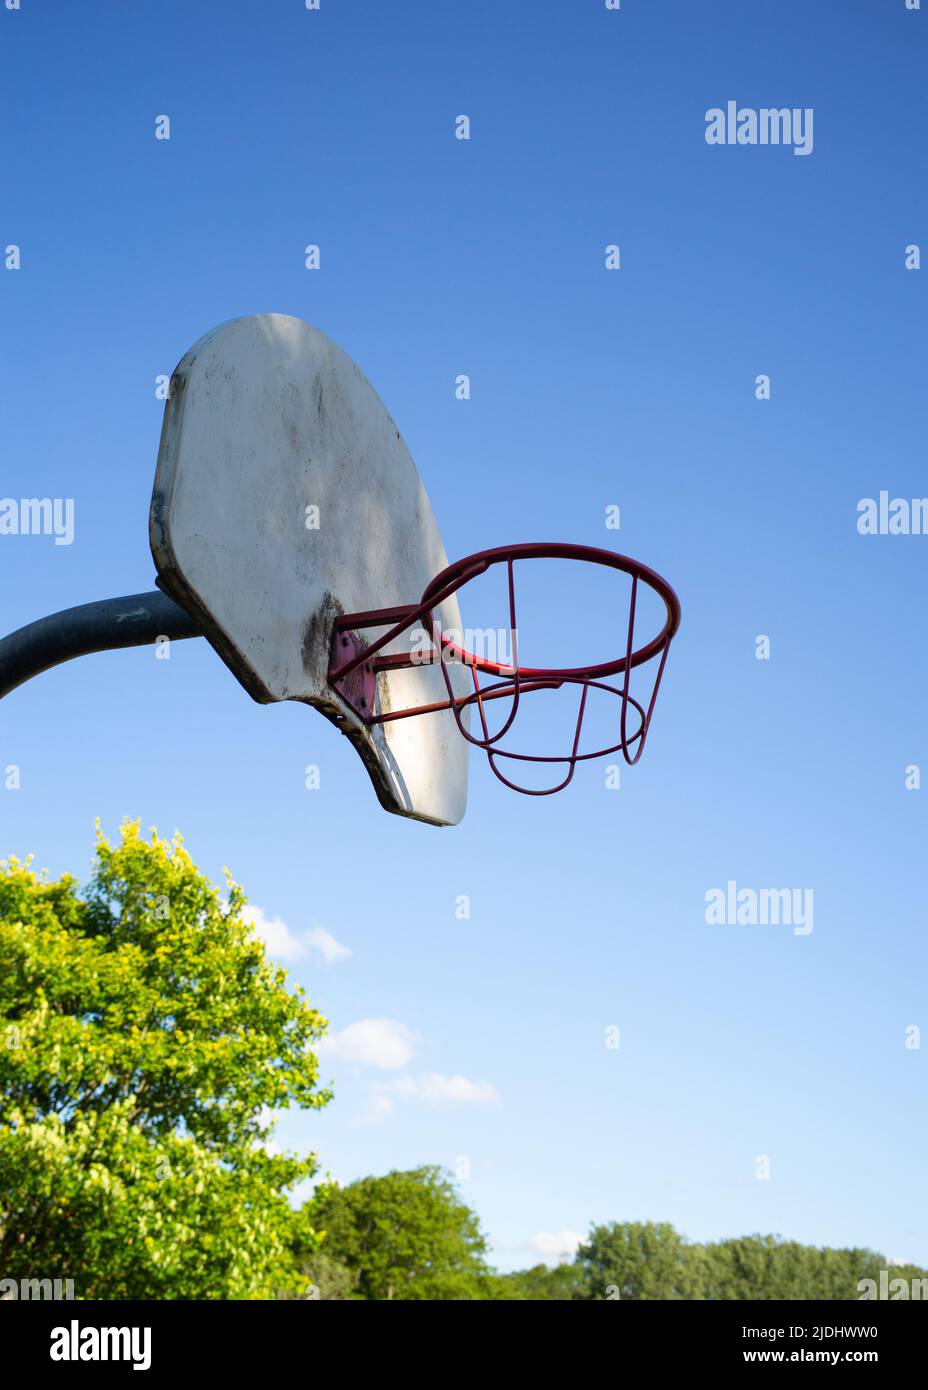 Metal basketball hoop and board against a cloudless strong blue sky with copy space. lit with dappled sunlight. Stock Photo